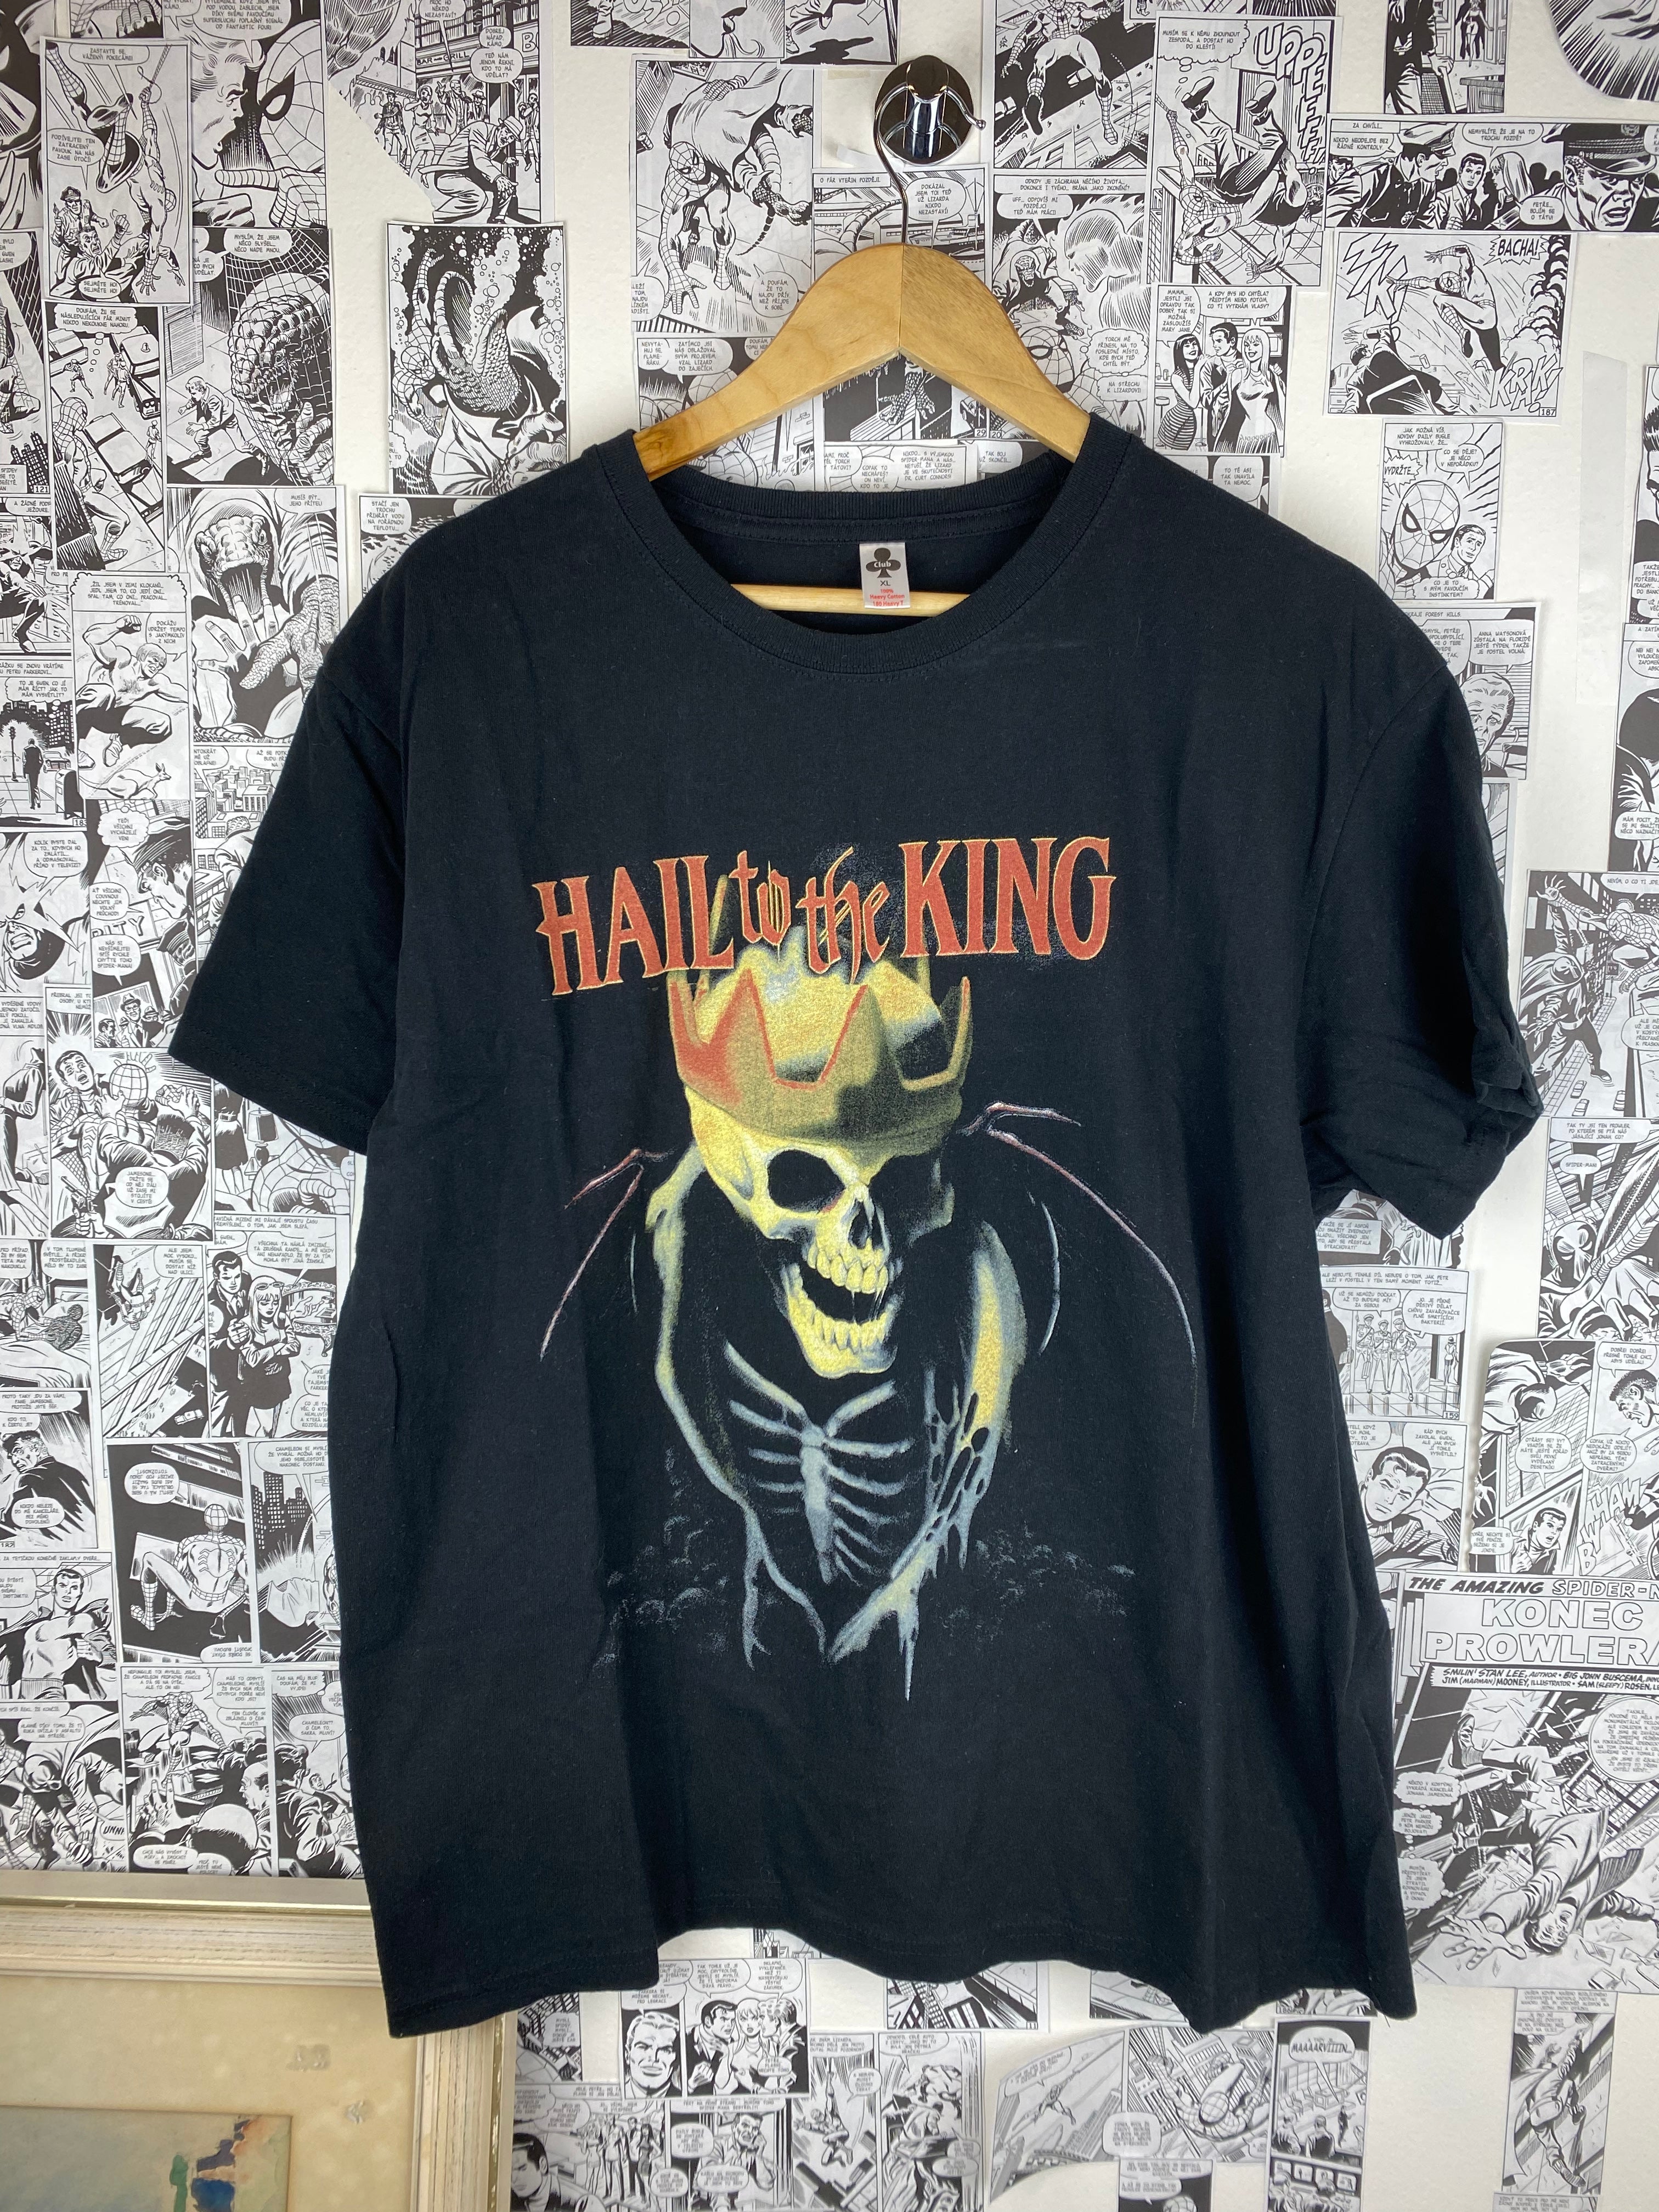 Vintage Avenged Sevenfold “Hail to the king” t-shirt - size XL